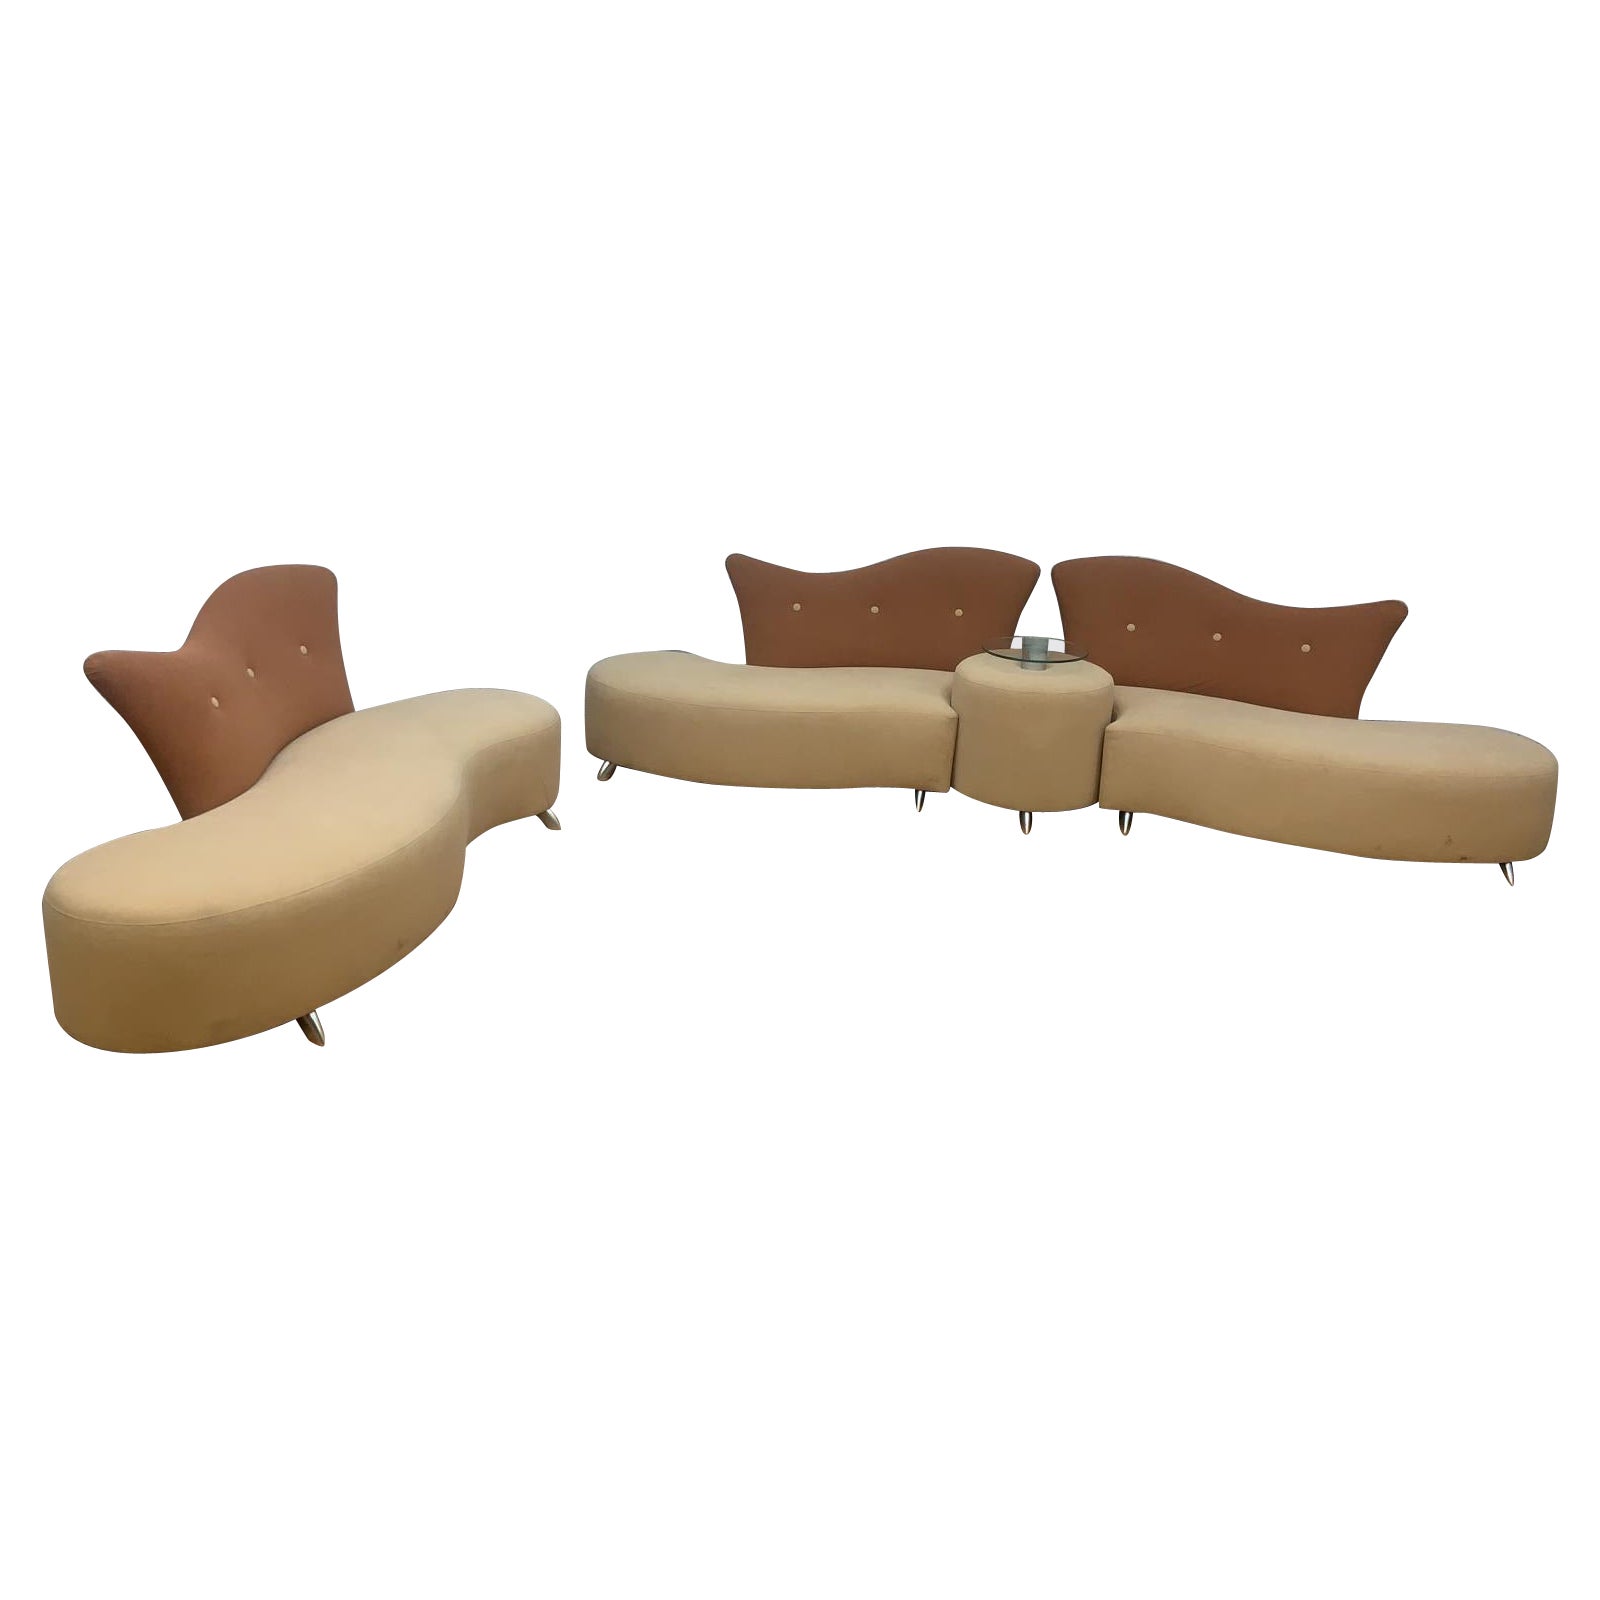 Postmodern Serpentine Sofa Set with Glass-Top Cocktail Table - 4 Piece Set For Sale